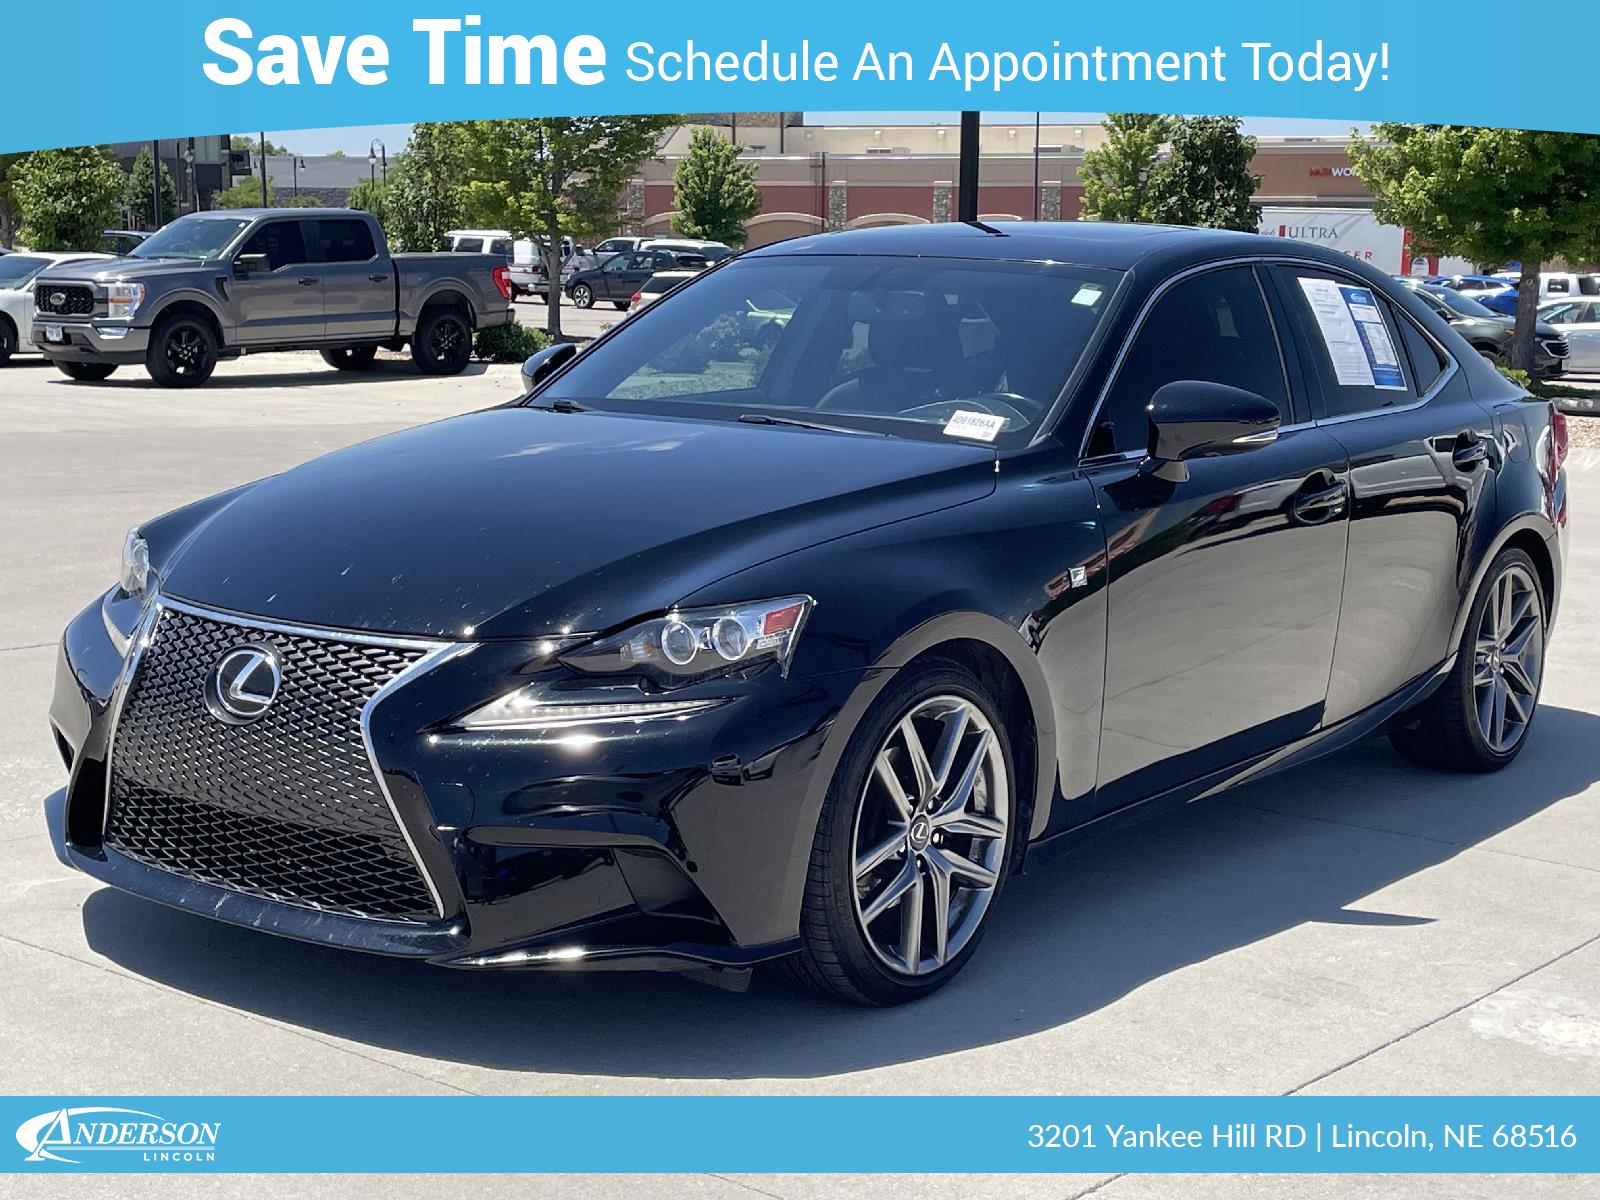 Used 2015 Lexus IS 250 Crafted Line Stock: 4001826AA